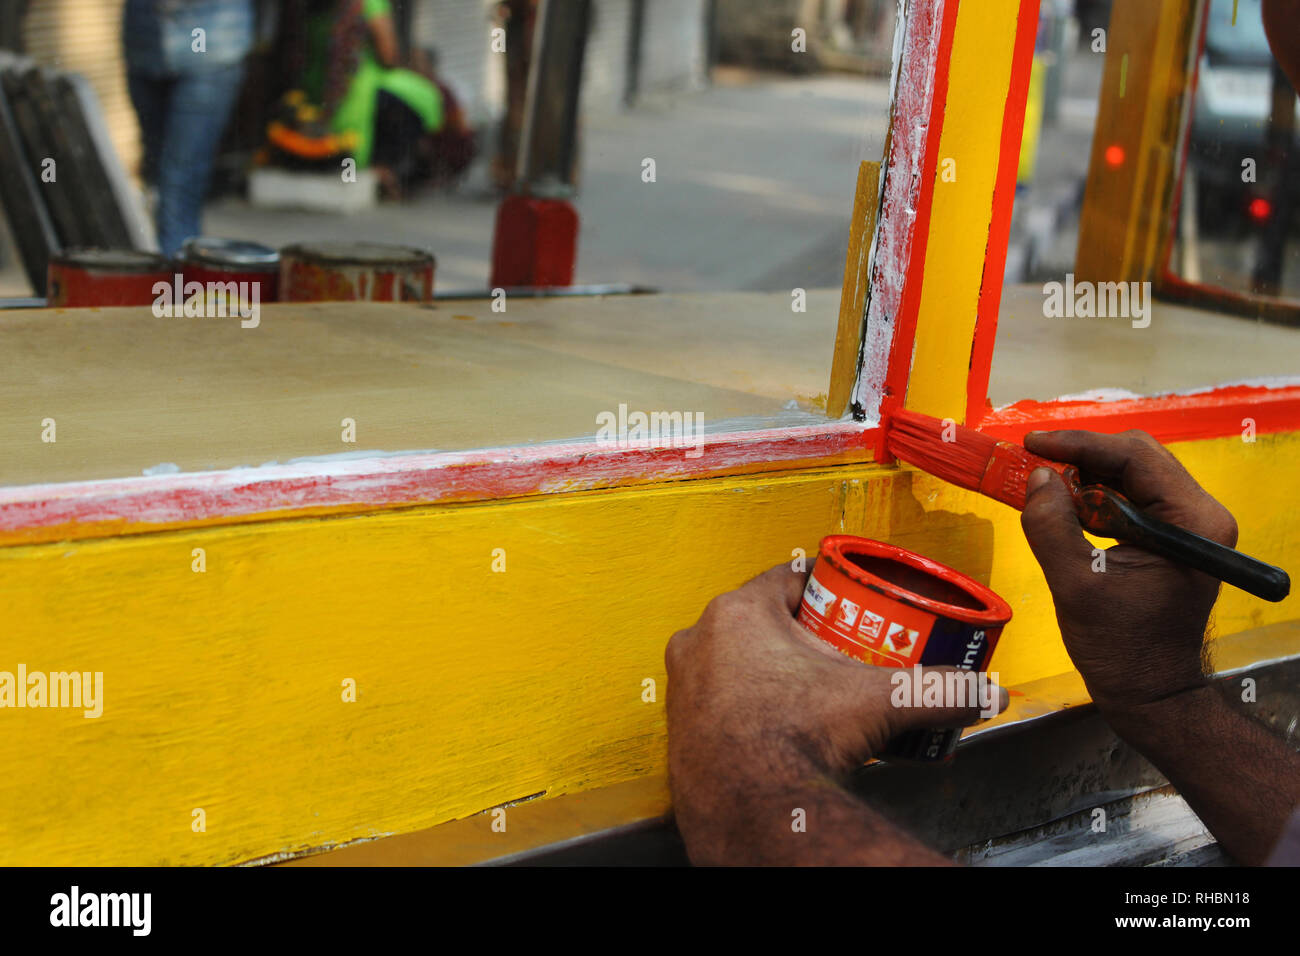 Man painting handcart with red color, Maharashtra, India Stock Photo